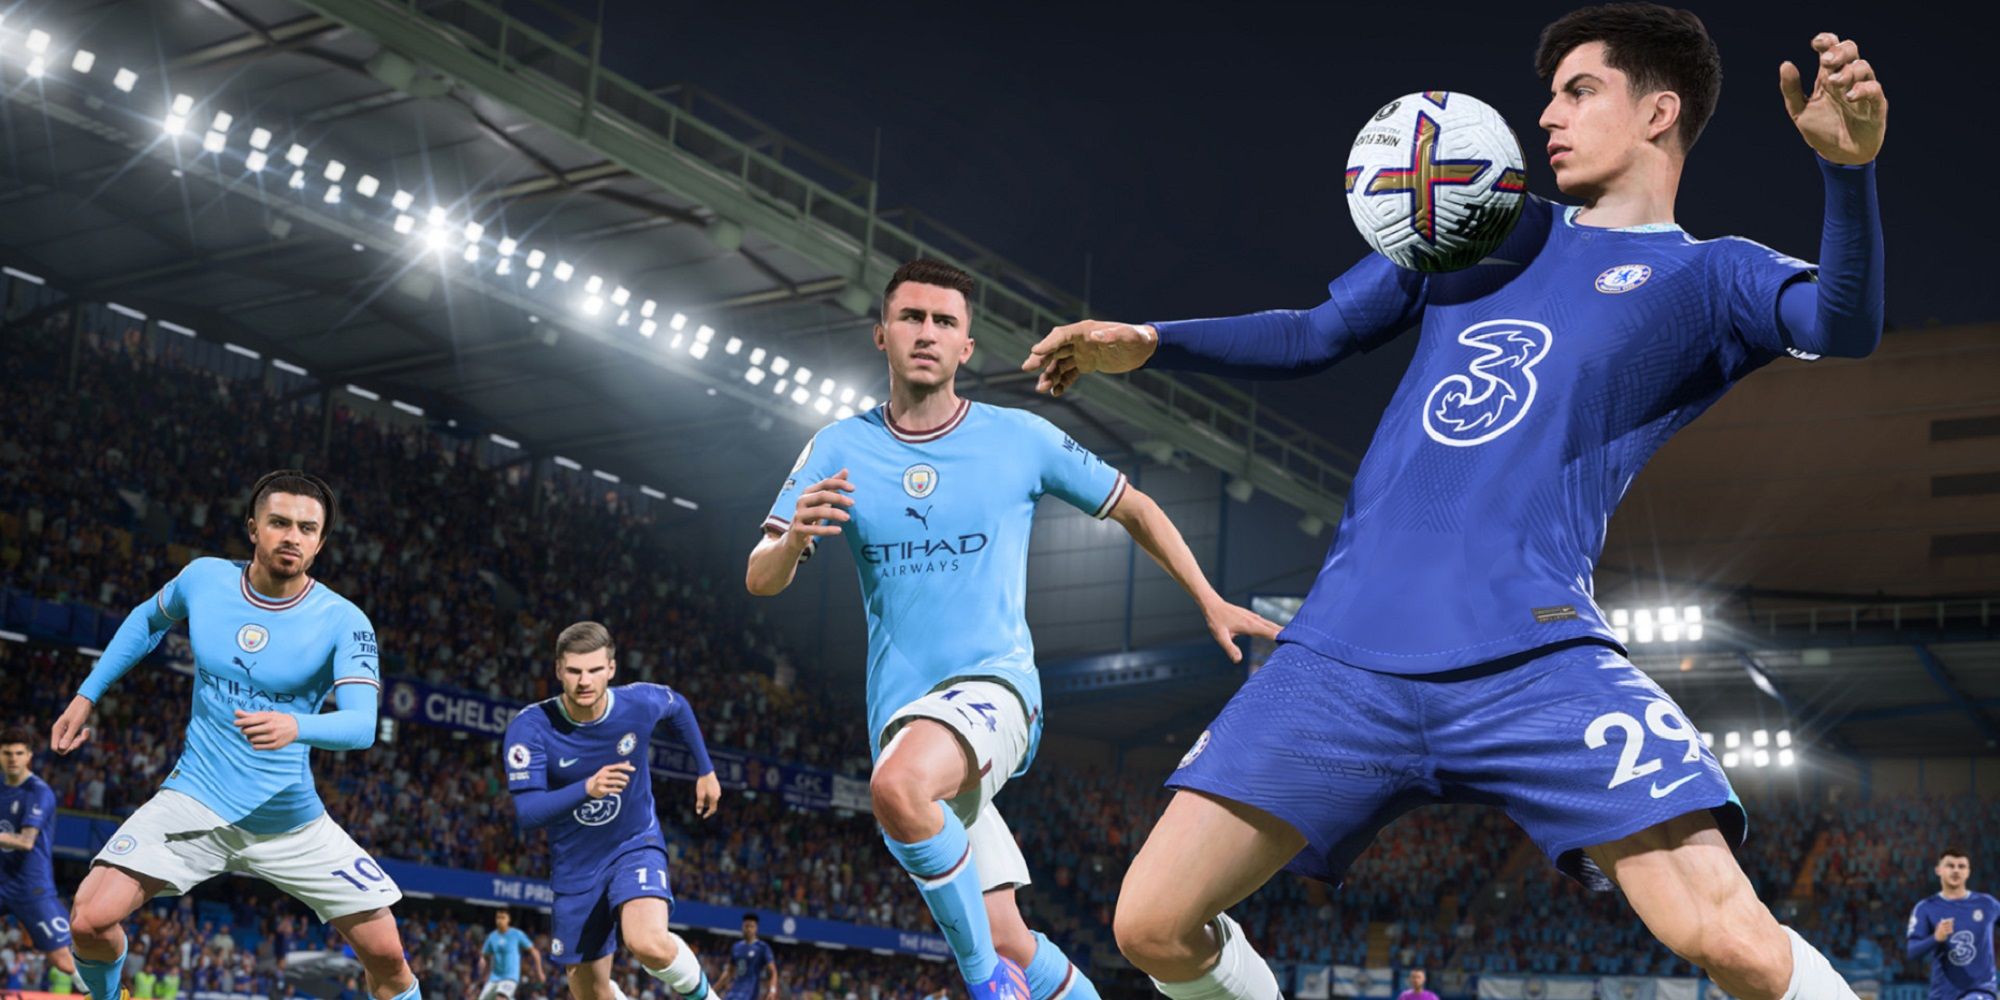 FIFA 23 pitch notes: How playable highlights feature changes career mode